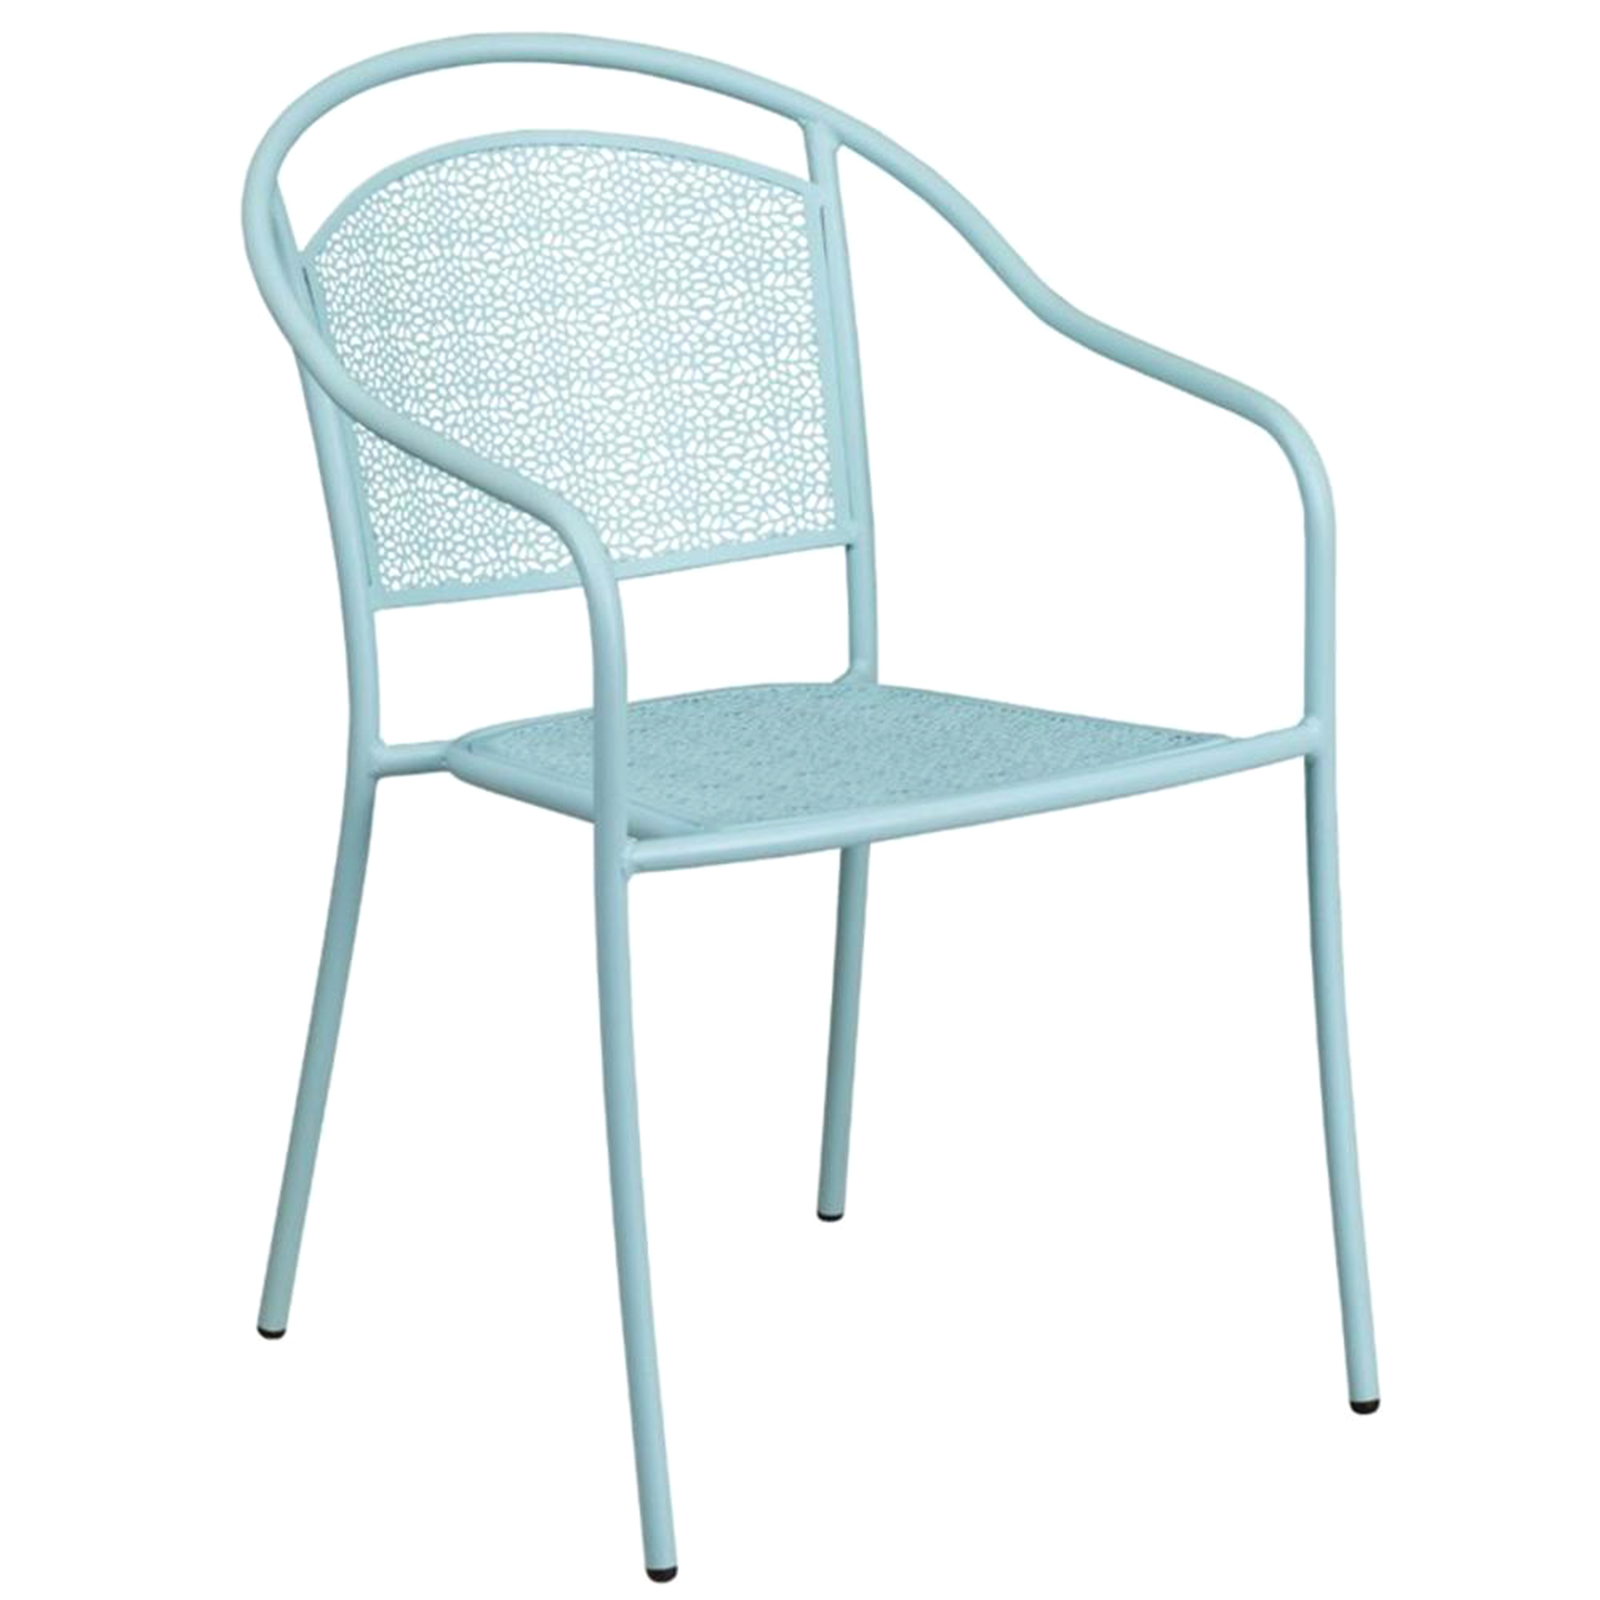 Flash Furniture Steel Patio Arm Chair with Round Back - Sky Blue